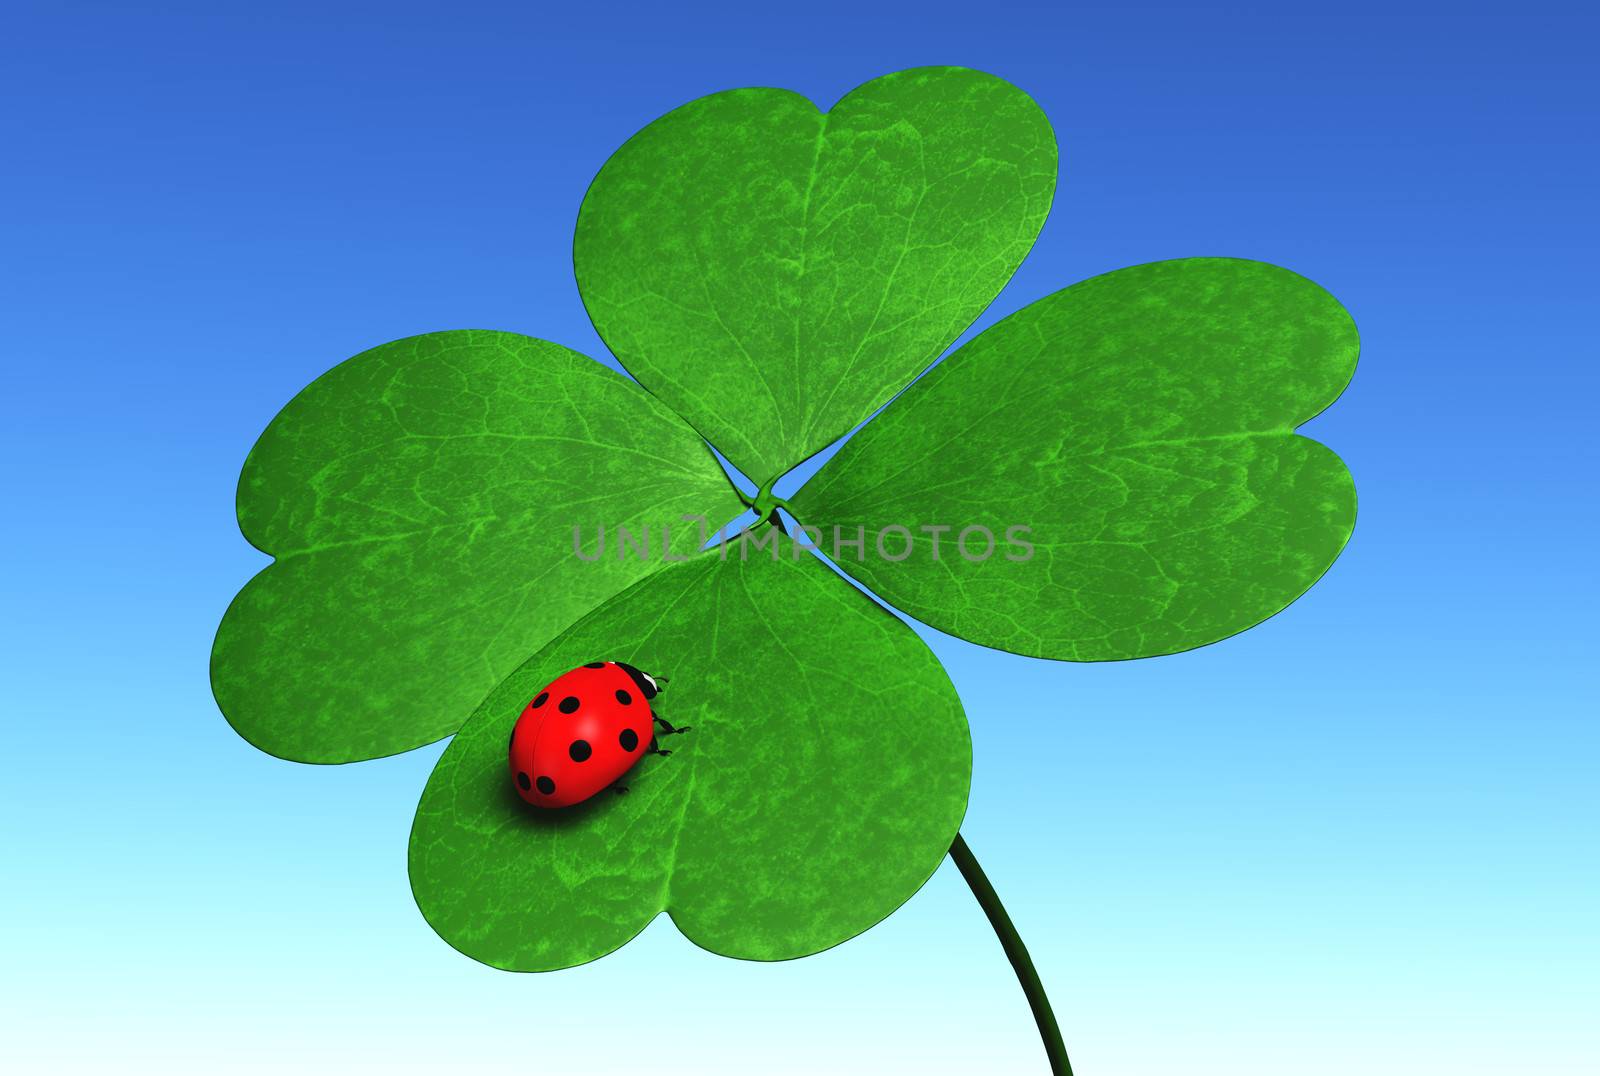 closeup of four-leaf clover that has a red ladybug on one leaf, with a blue sky on the background